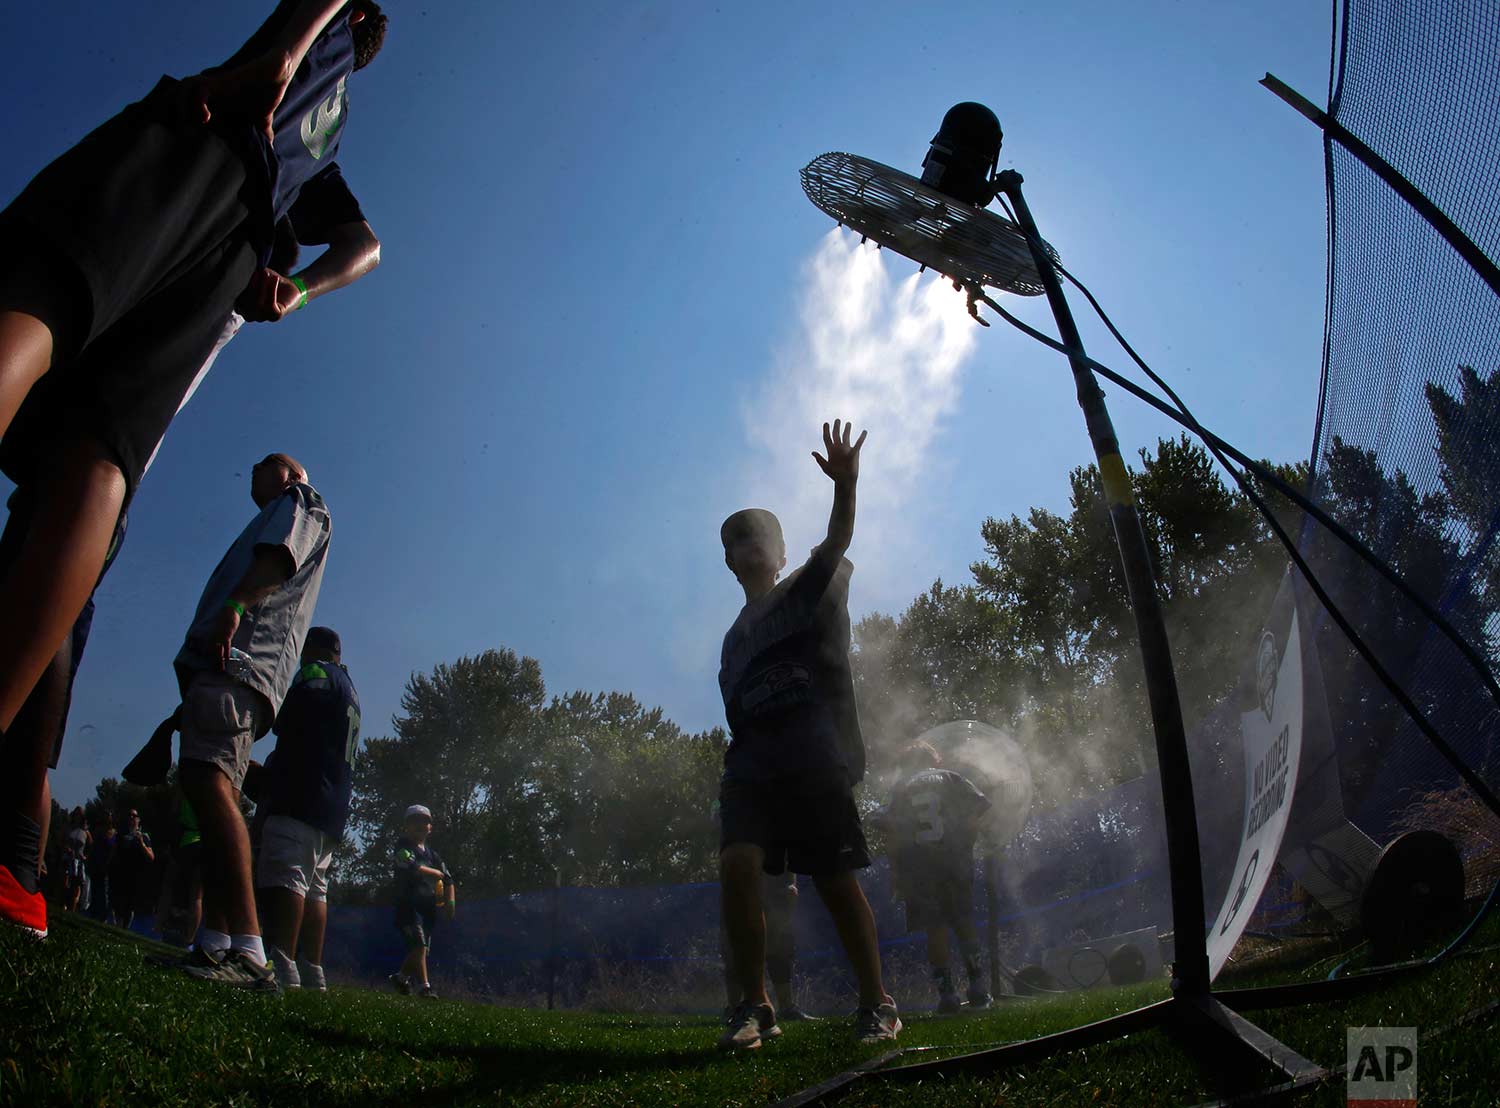  A fan attending a Seattle Seahawks NFL football training camp reaches toward a fan as he cools off at a misting station, Tuesday, Aug. 1, 2017, in Renton, Wash. (AP Photo/Ted S. Warren) 